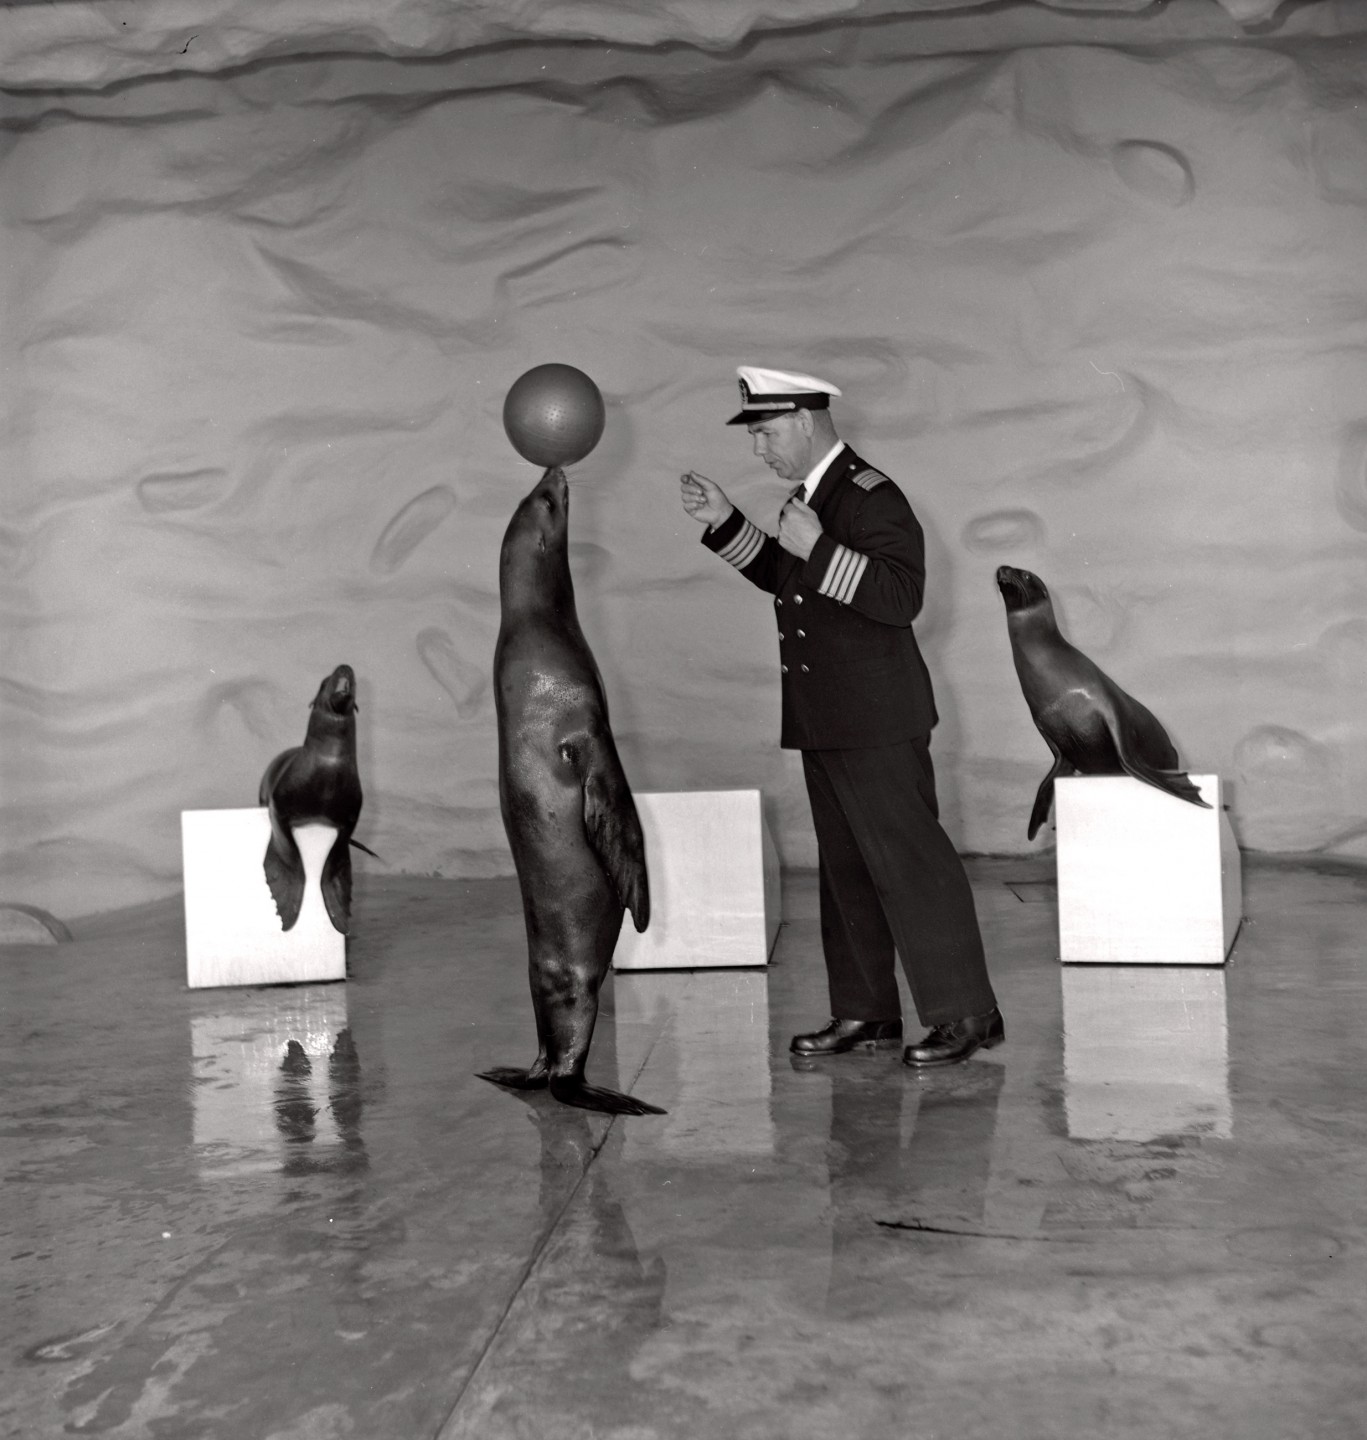 Captain Bennie Kirkbride turned pinniped-packed performances into shows that had Zoo audiences roaring with laughter for 35 years. What began in 1948 as a less-than-10-minute act grew into elaborate productions incorporating the 3 types of shows that Bennie developed during his years at the Zoo: a dry act, which featured seals and sea lions performing on the stage; a diving act, which took place in the Wegeforth Bowl pool; and the most unusual—the seals and sea lions presenting their skills while riding ponies.